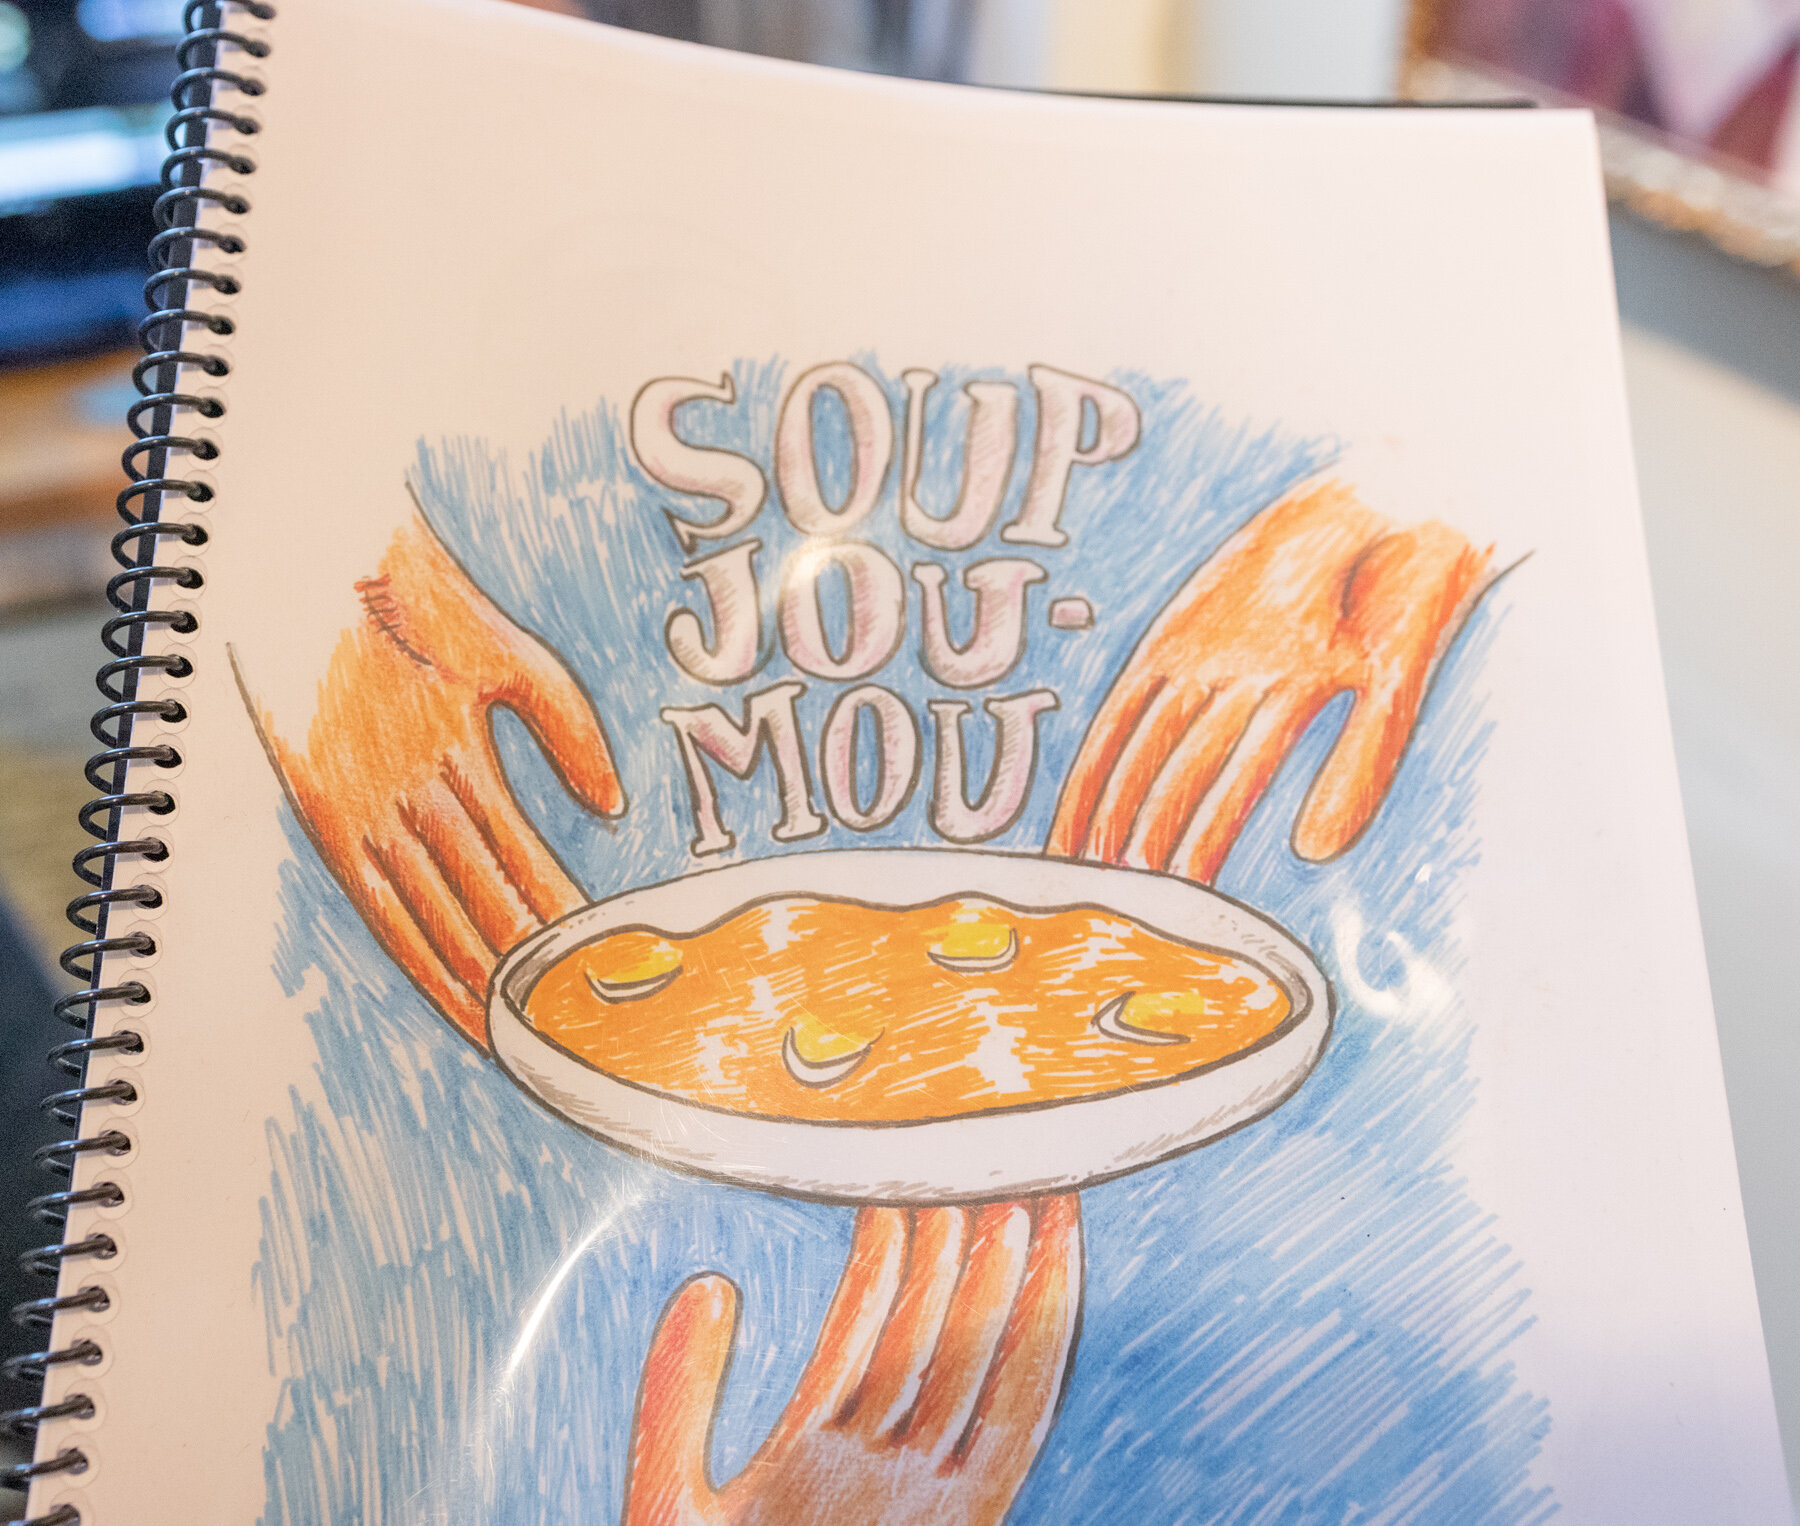  Children’s book about the history of the world-renowned meal of victory, soup joumou. Yes, it is that famous of a meal. Check your history.  